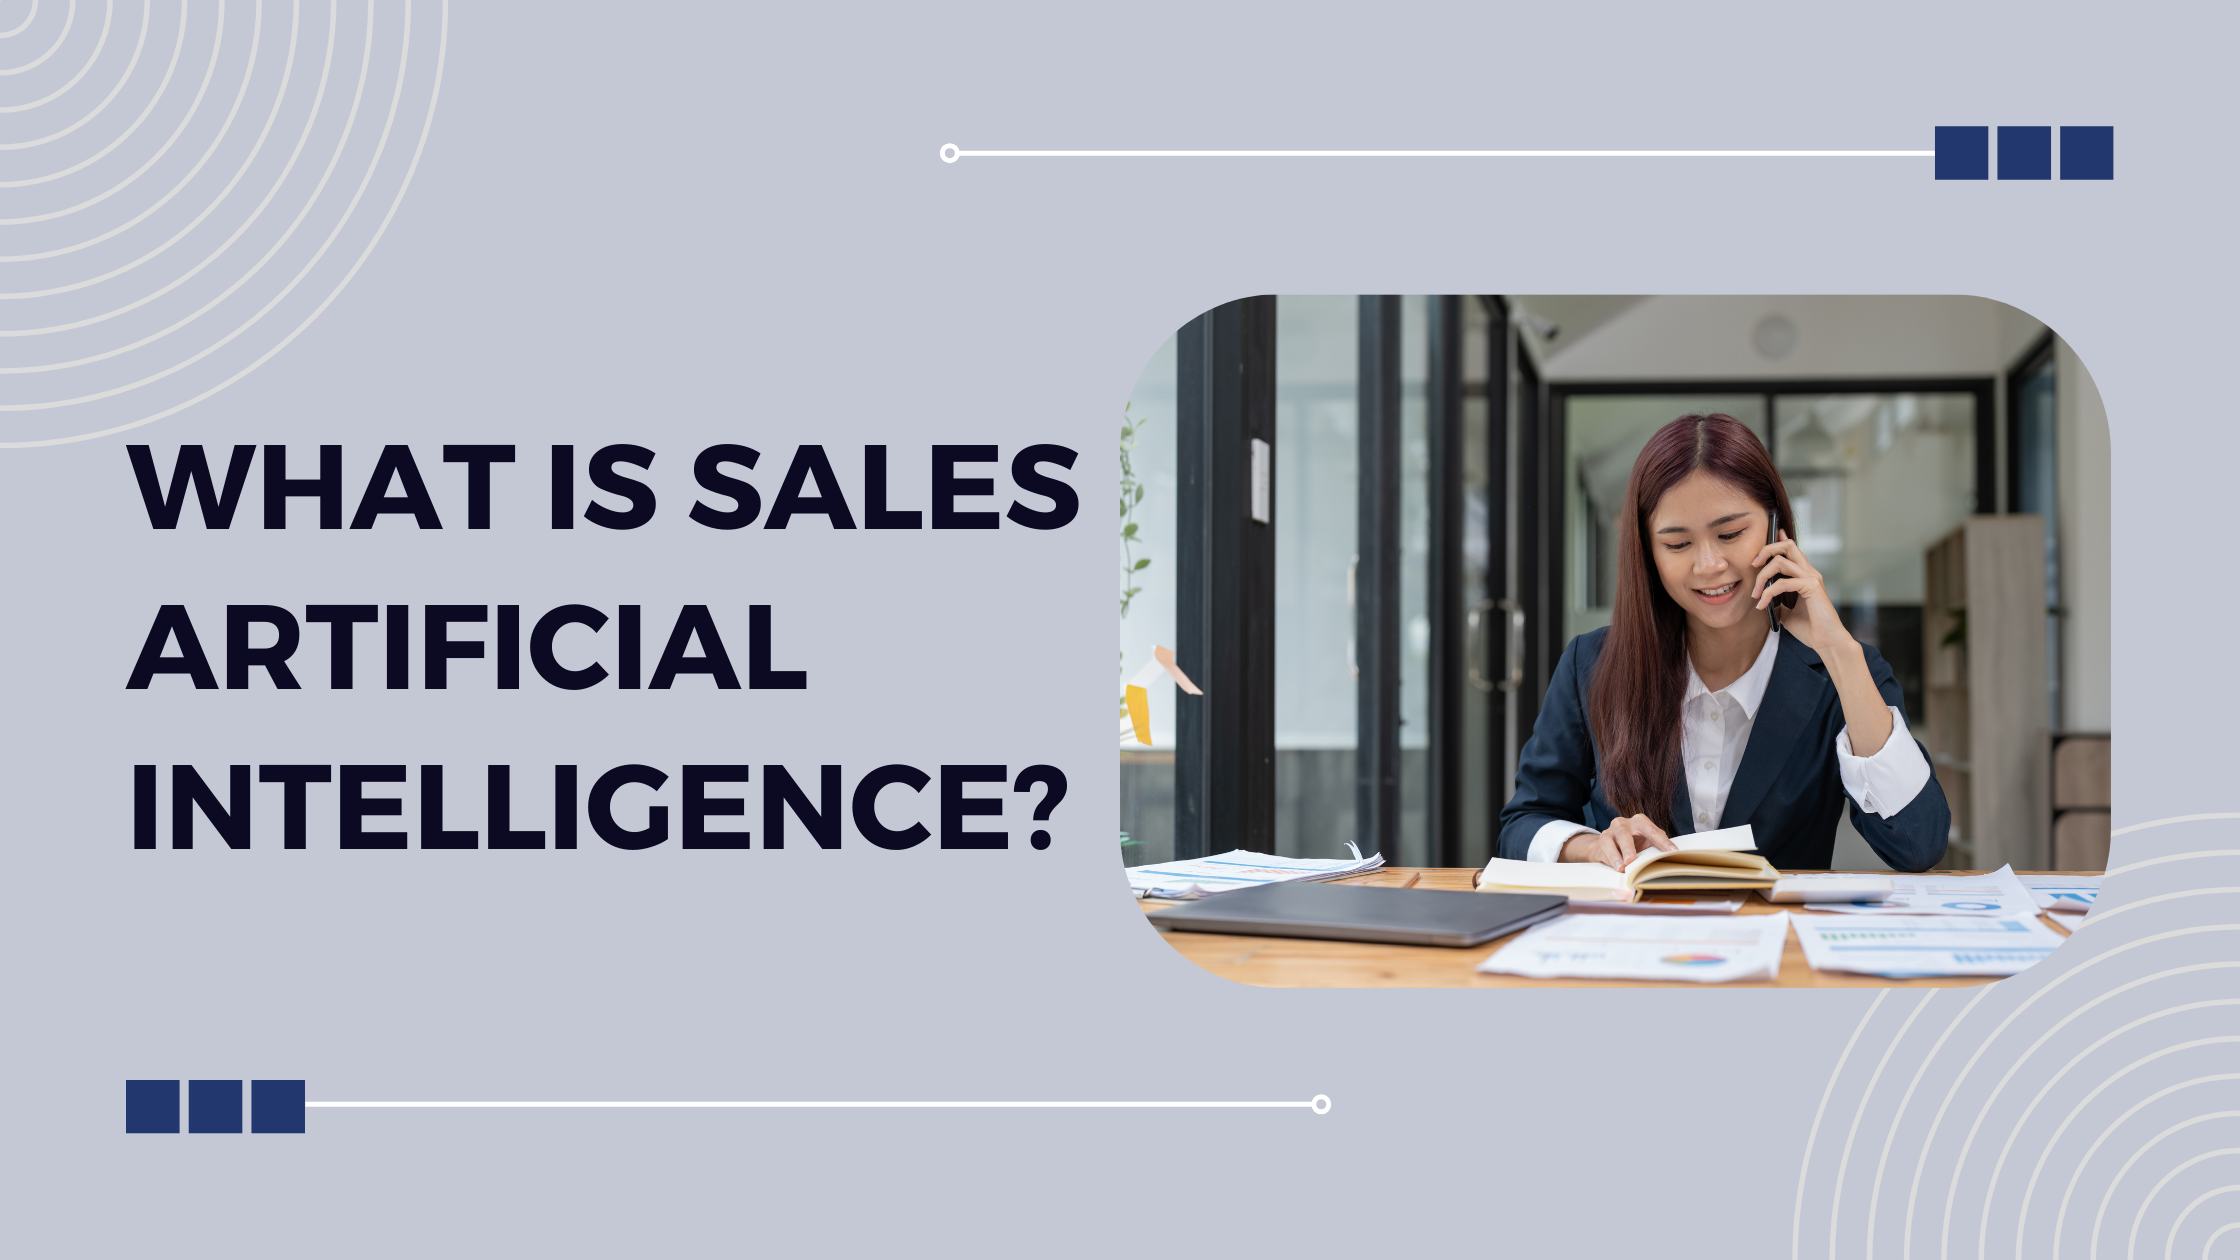 What is sales artificial intelligence?